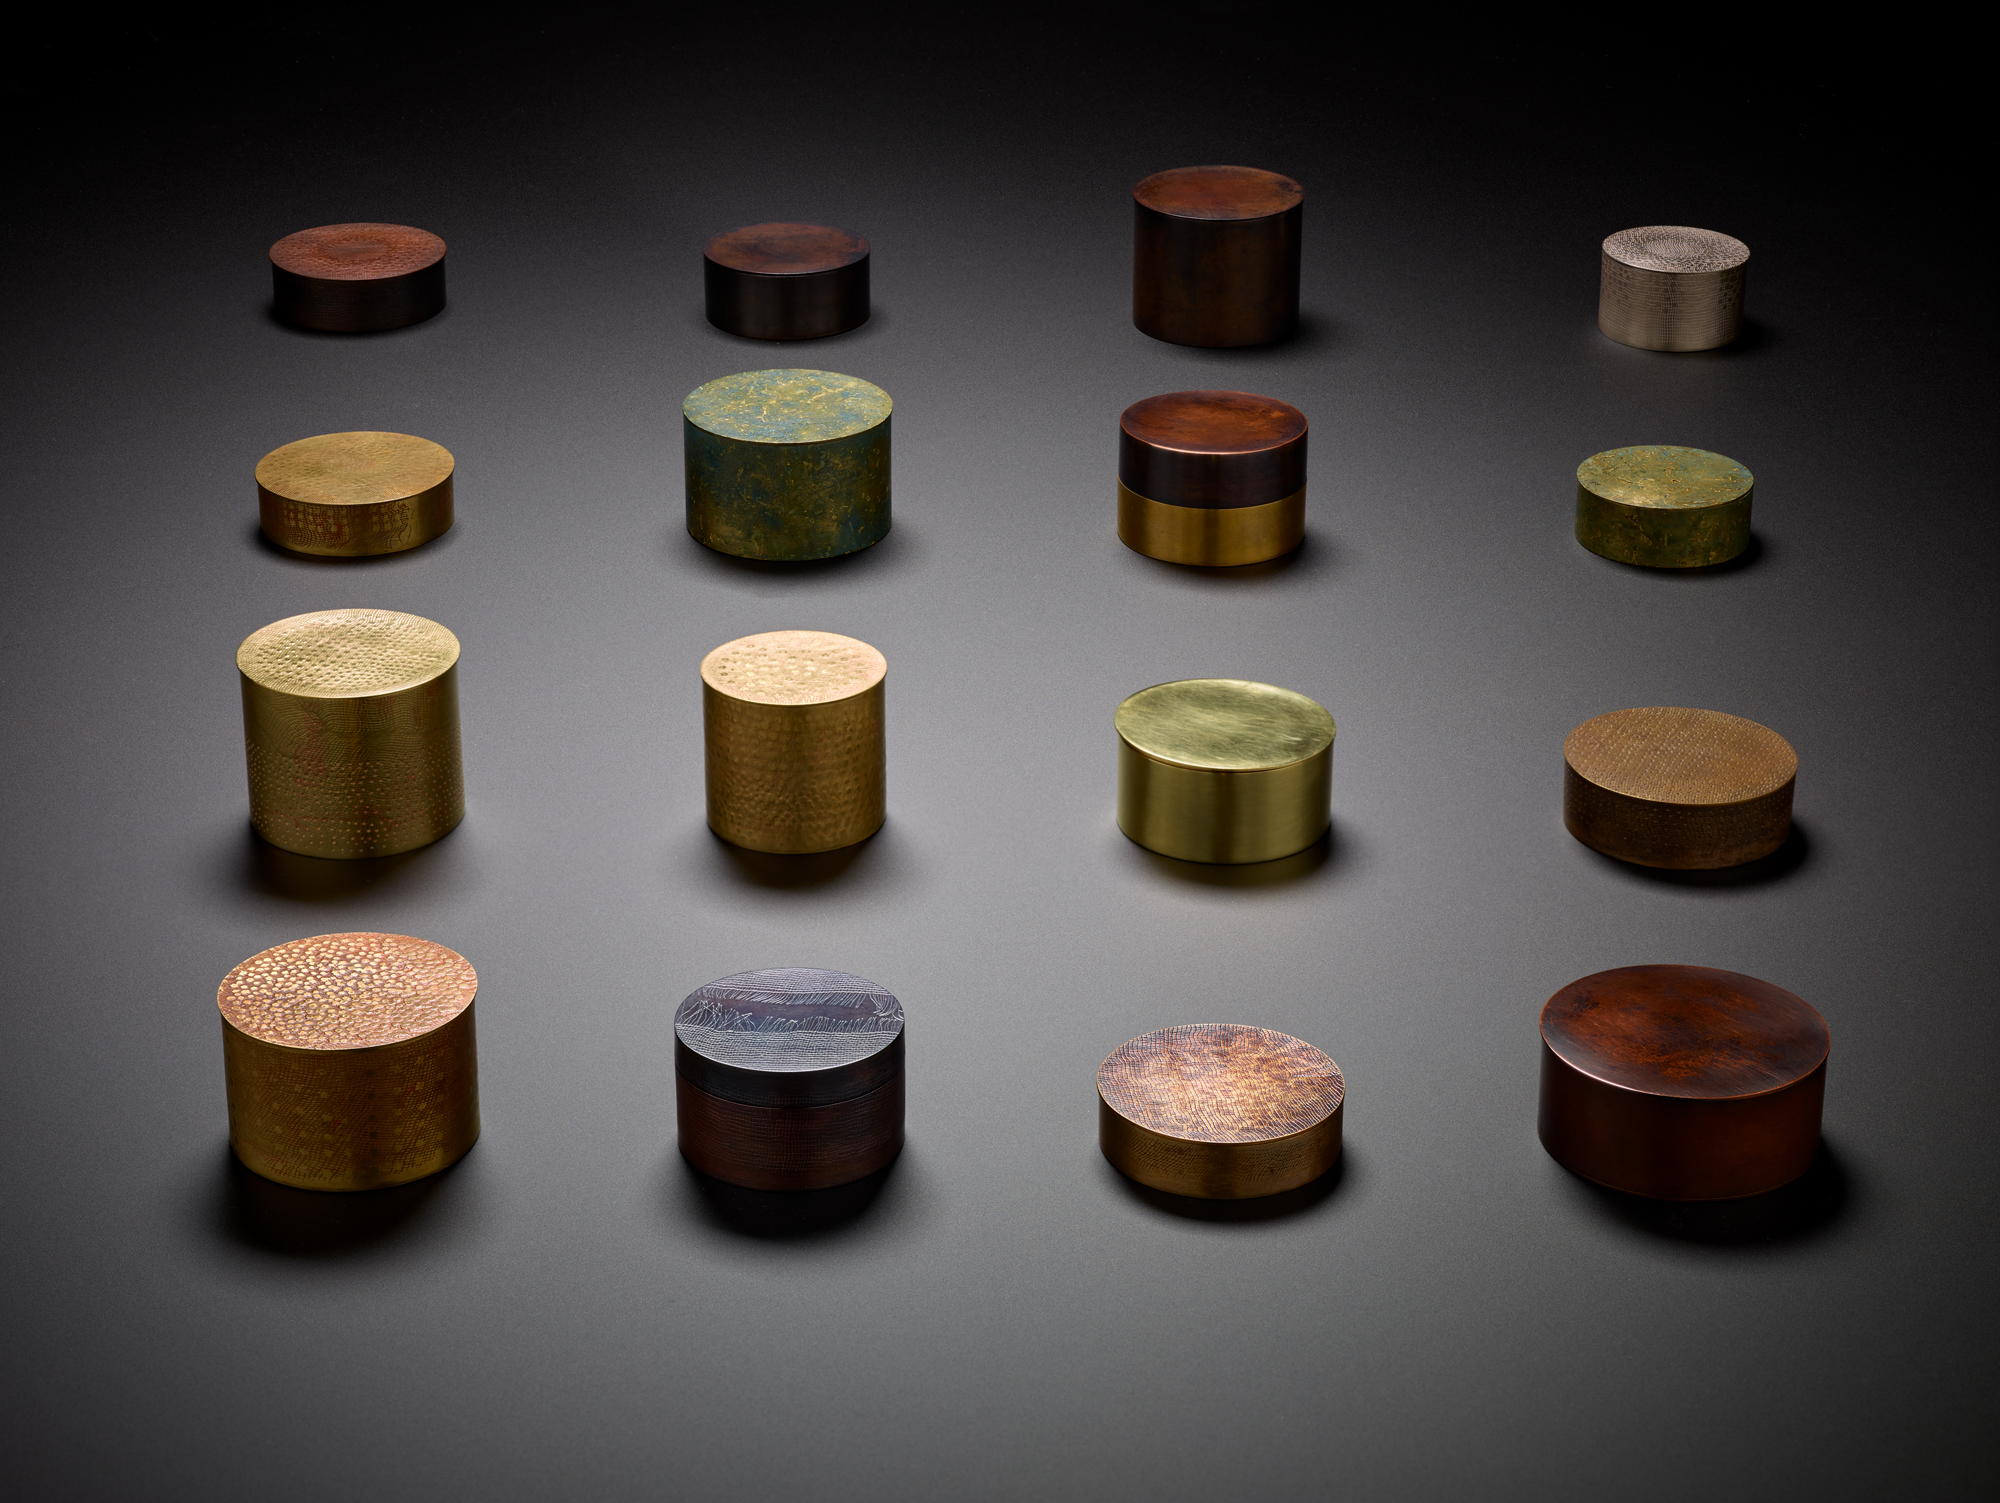 Vessels for Wayfaring (2019-2020), by Zoe Veness. Recycled brass, copper and sterling silver with various finishes. Average dimensions: 6.5 x 6.5 x 6.0 cm. Photo: Peter Whyte Photography